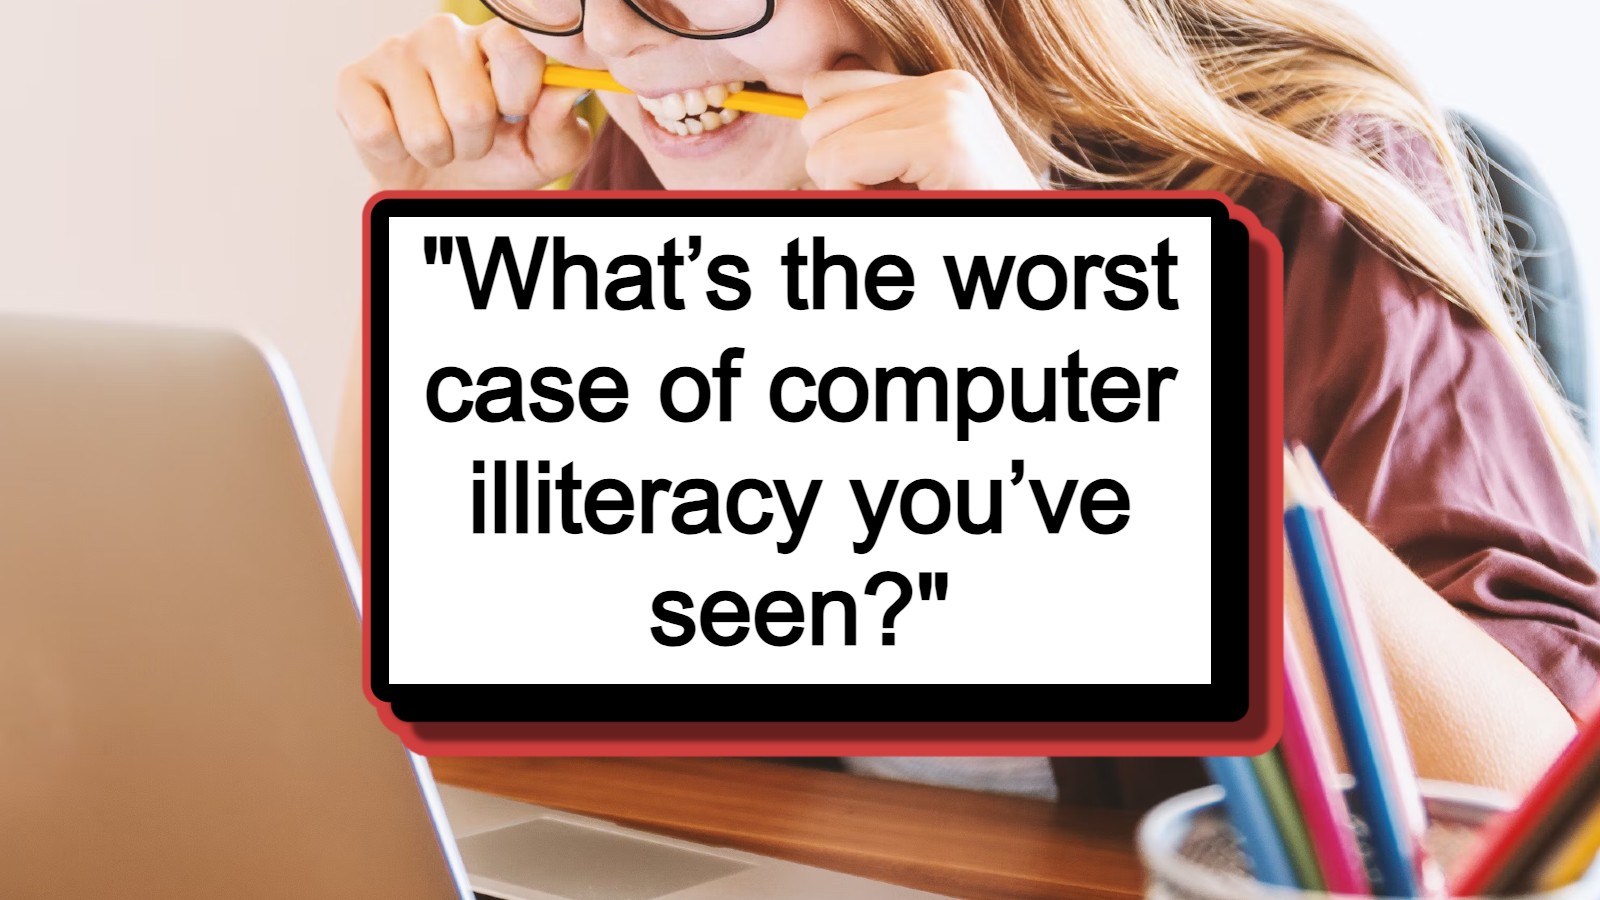 20+ Exasperated tech savvy people share the most computer illiterate individuals they've ever encountered: 'Send both files in one email, so you don't have to pay twice'